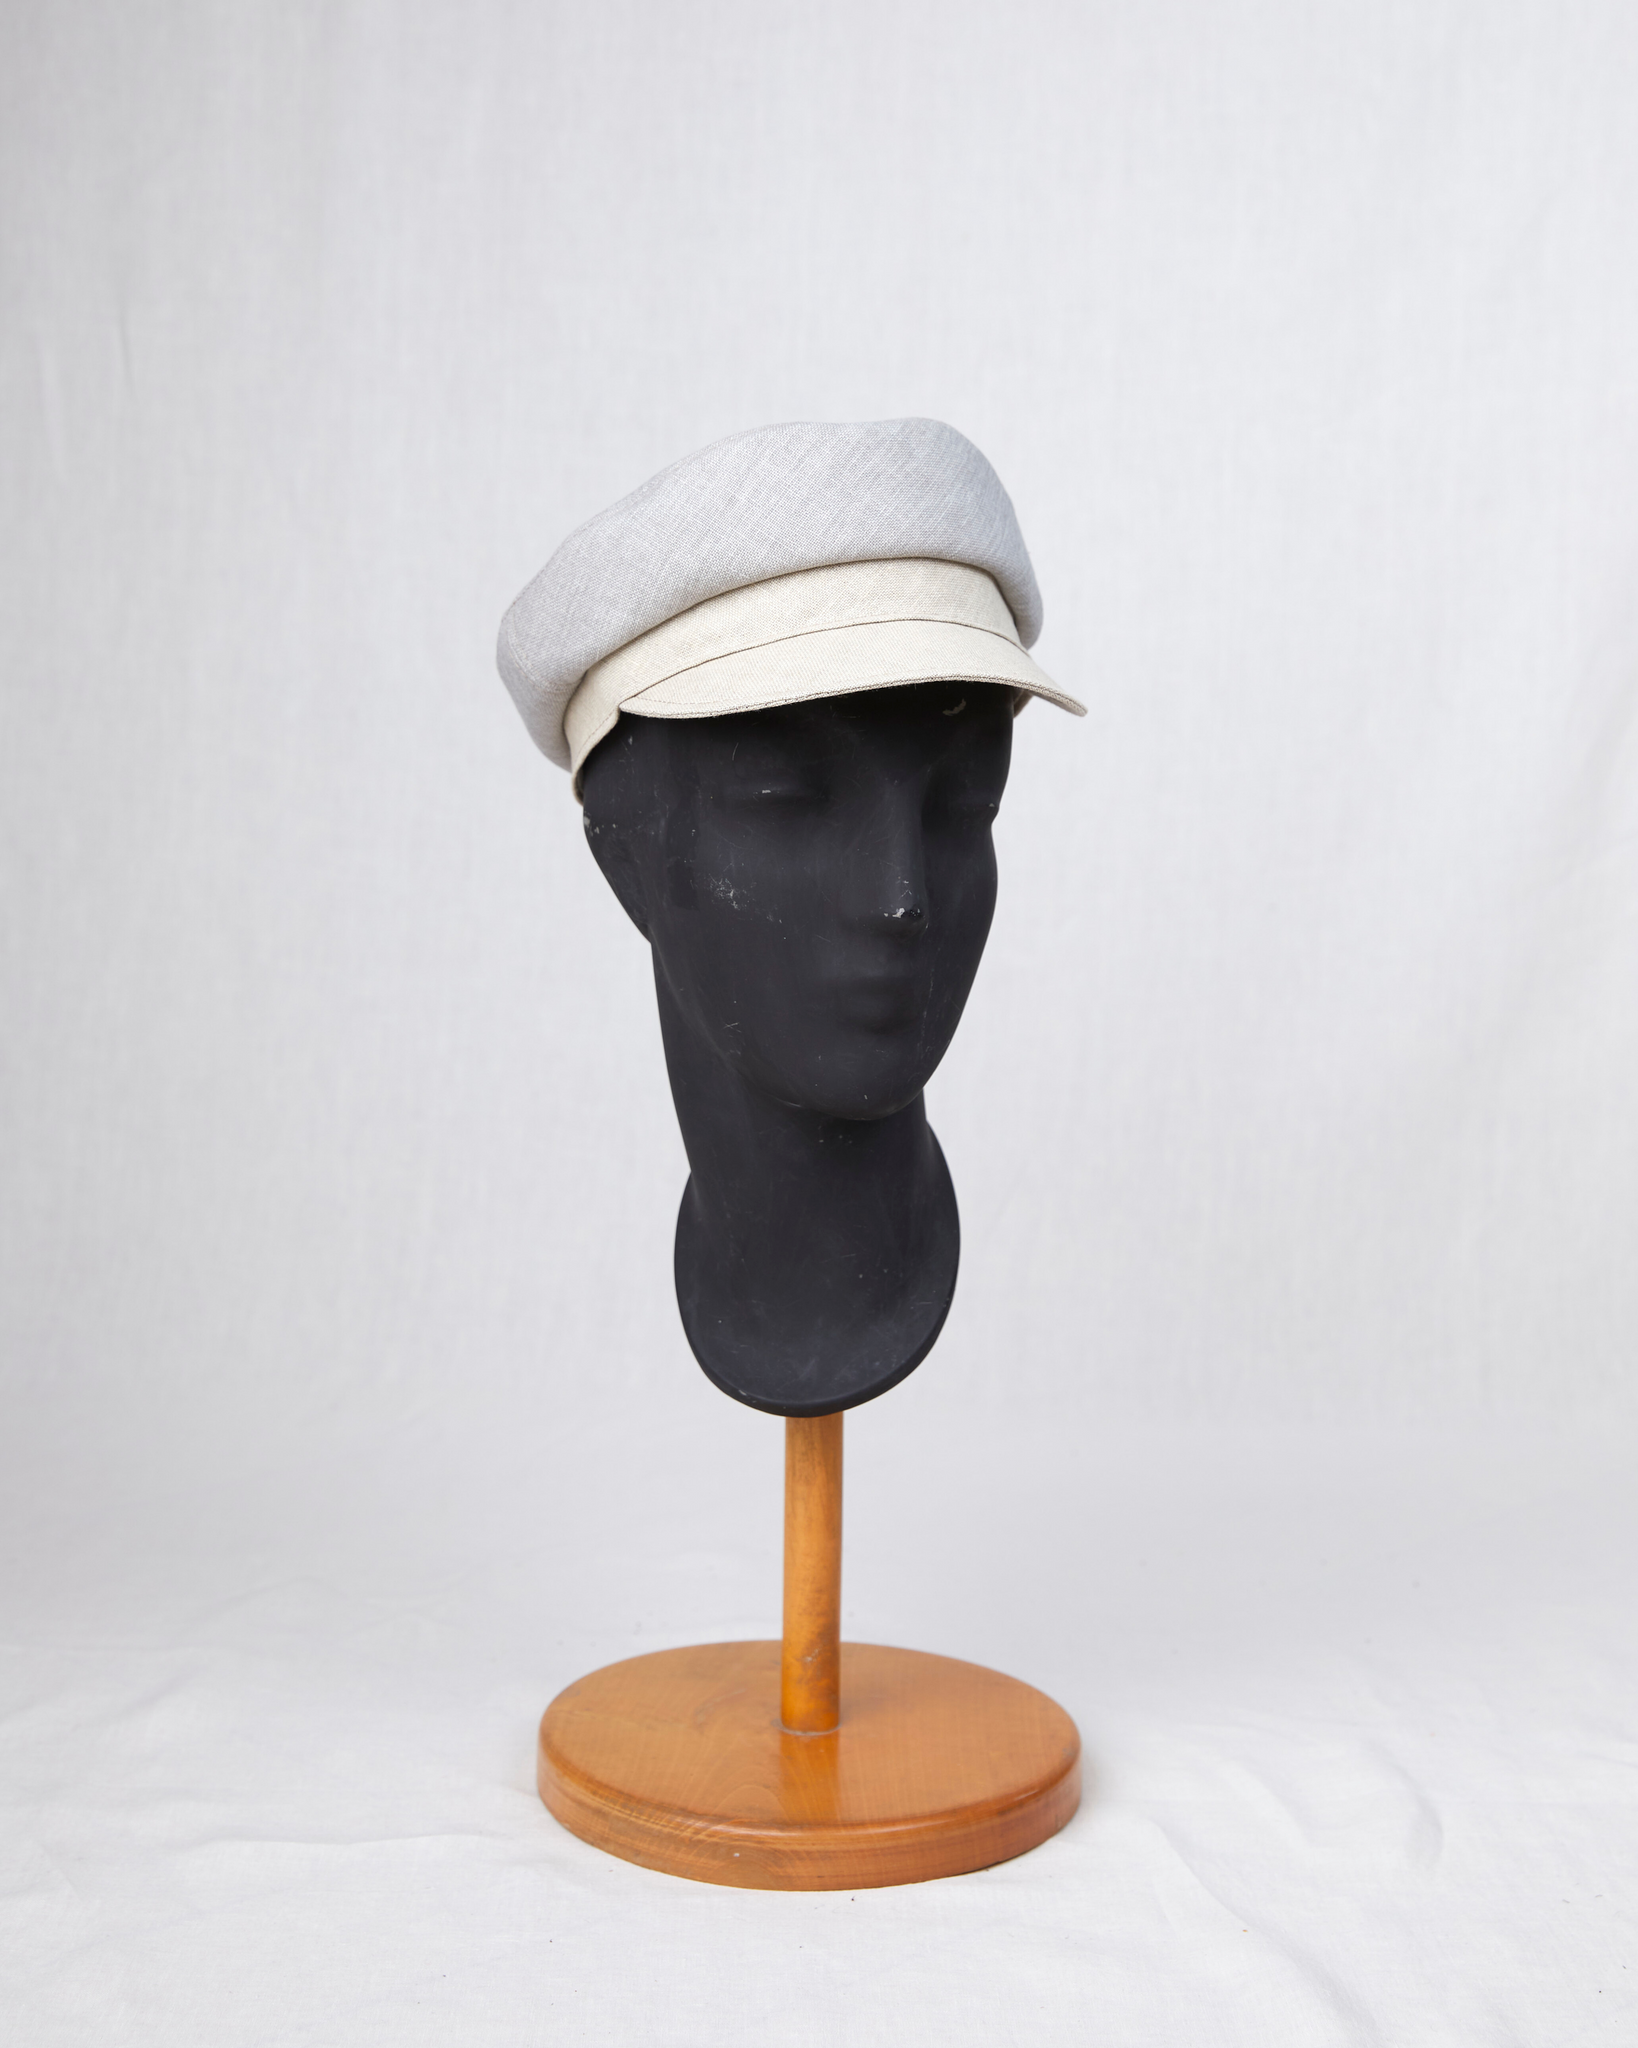 HEADQUARTER | couture headwear Sailor's cap, made of double face linen. Designed and handcrafted in Switzerland.